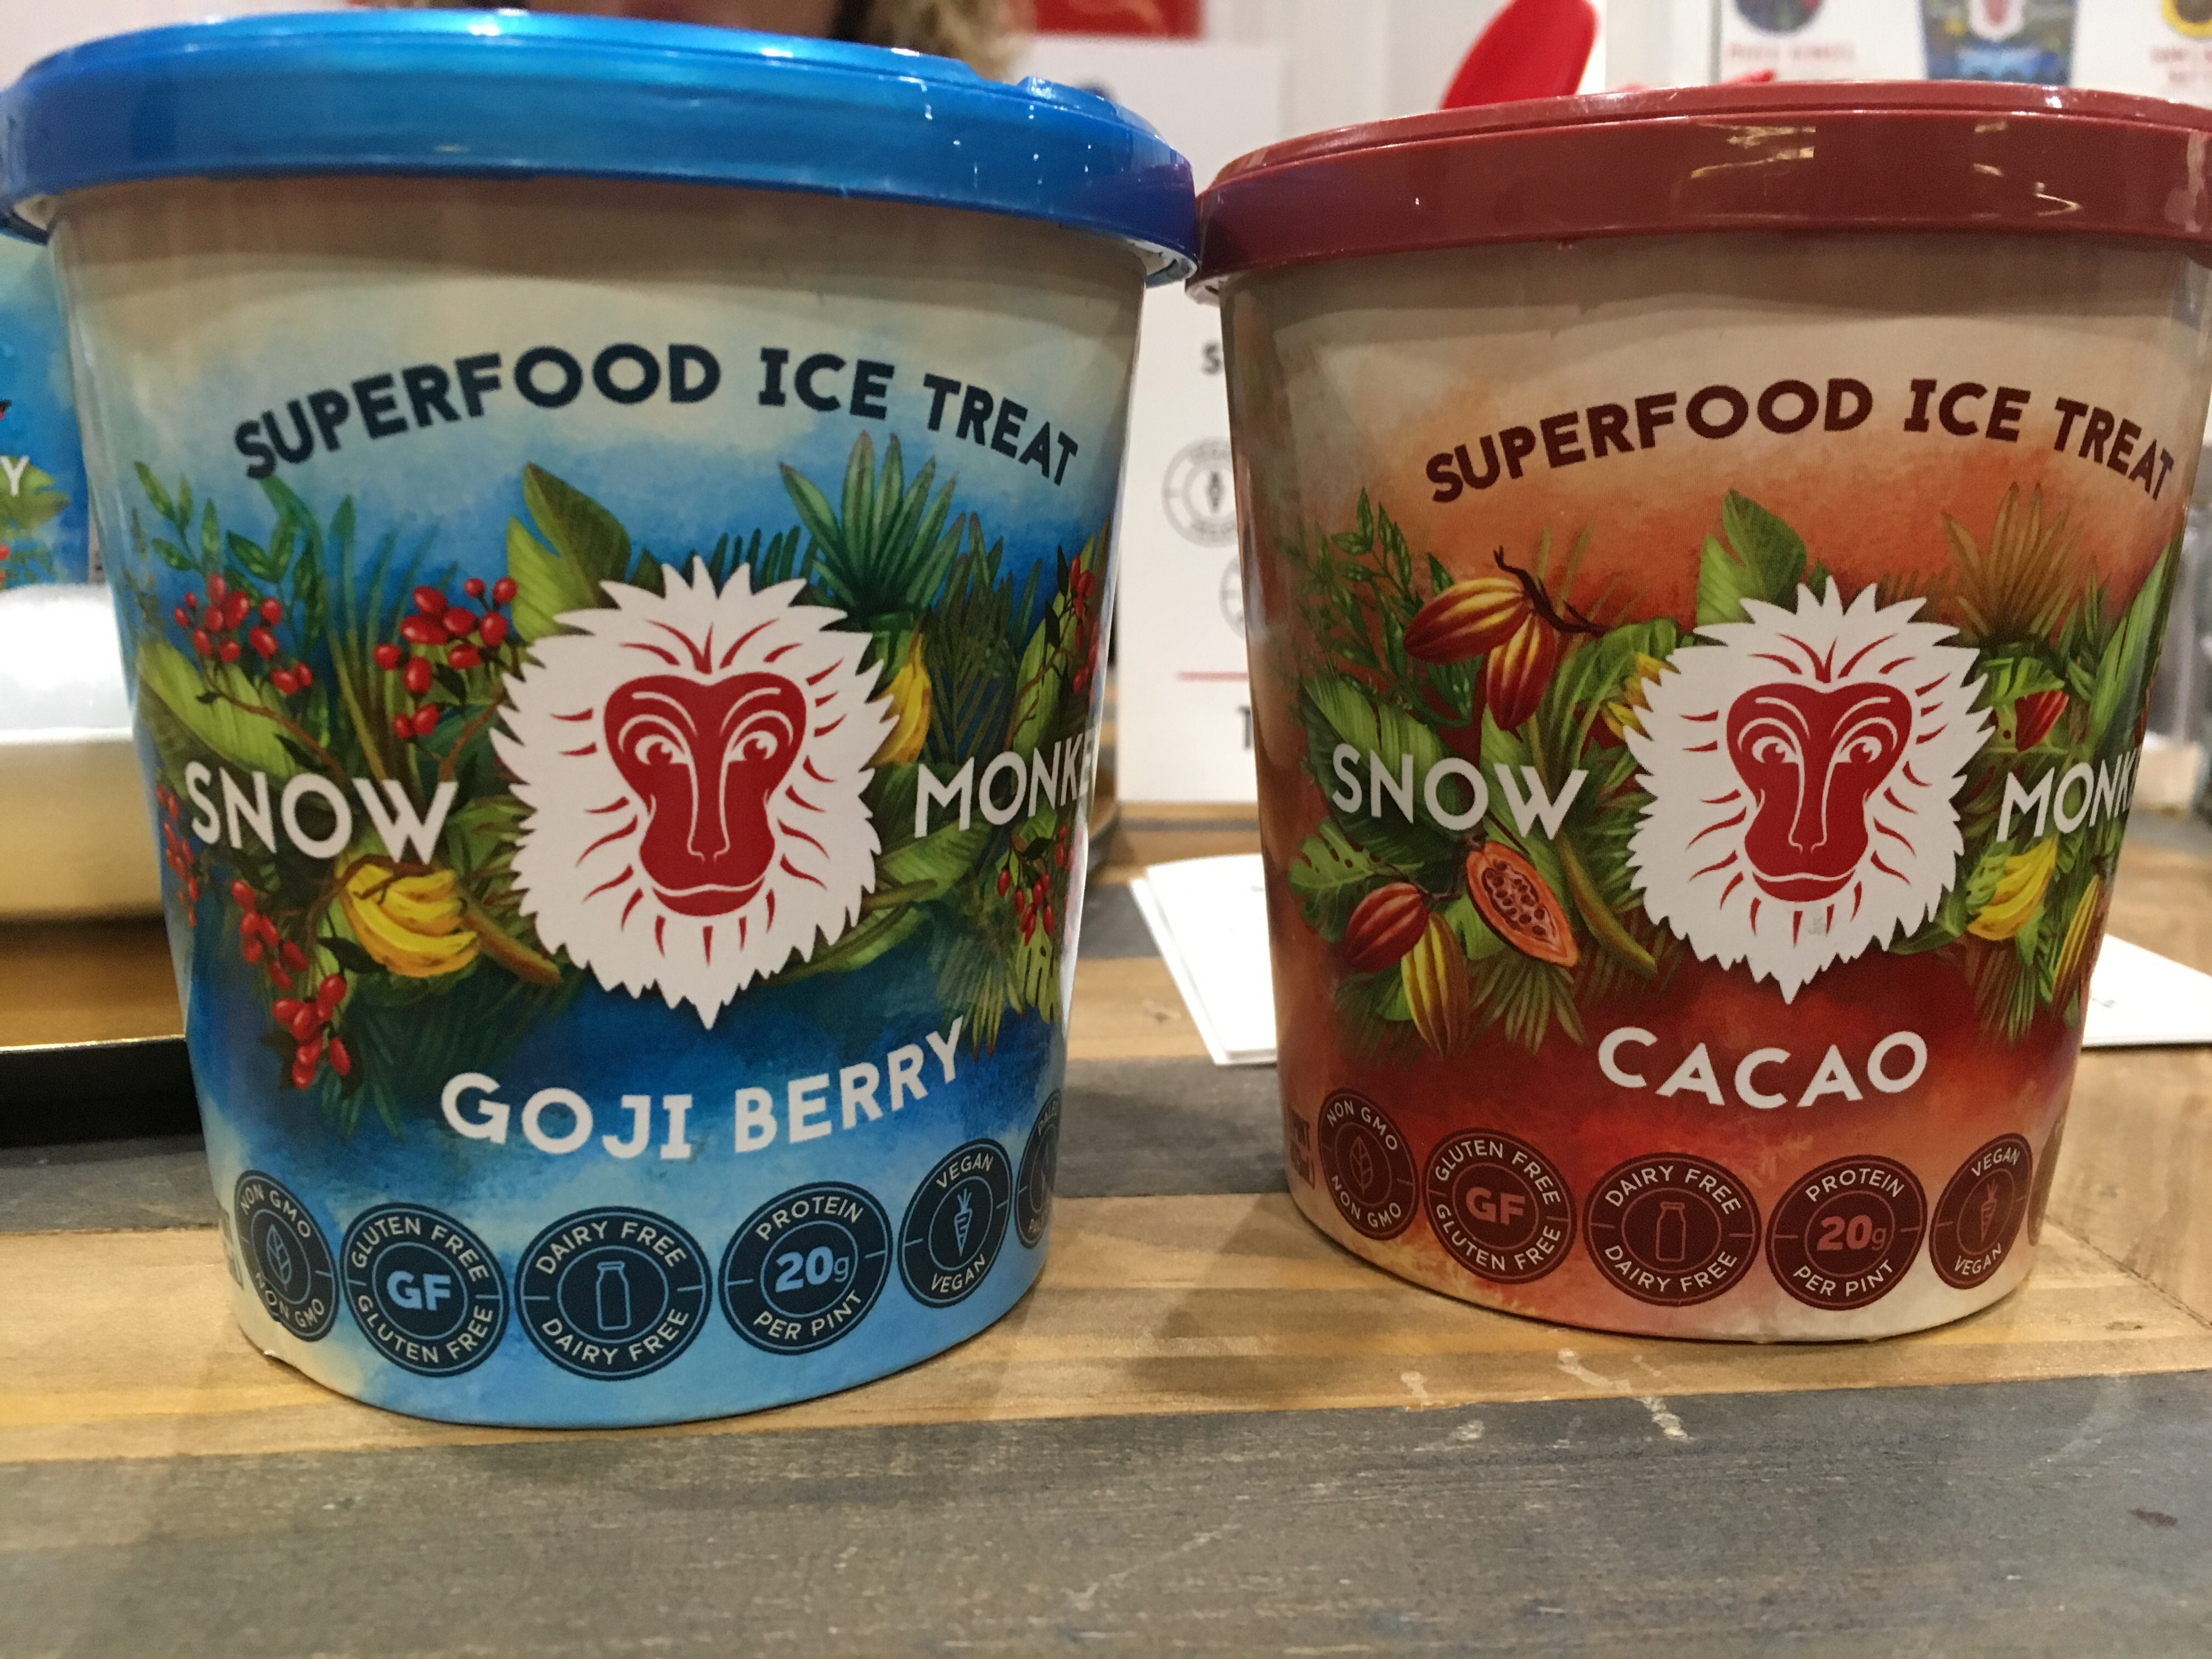 Super food ice cream at the fancy food show 